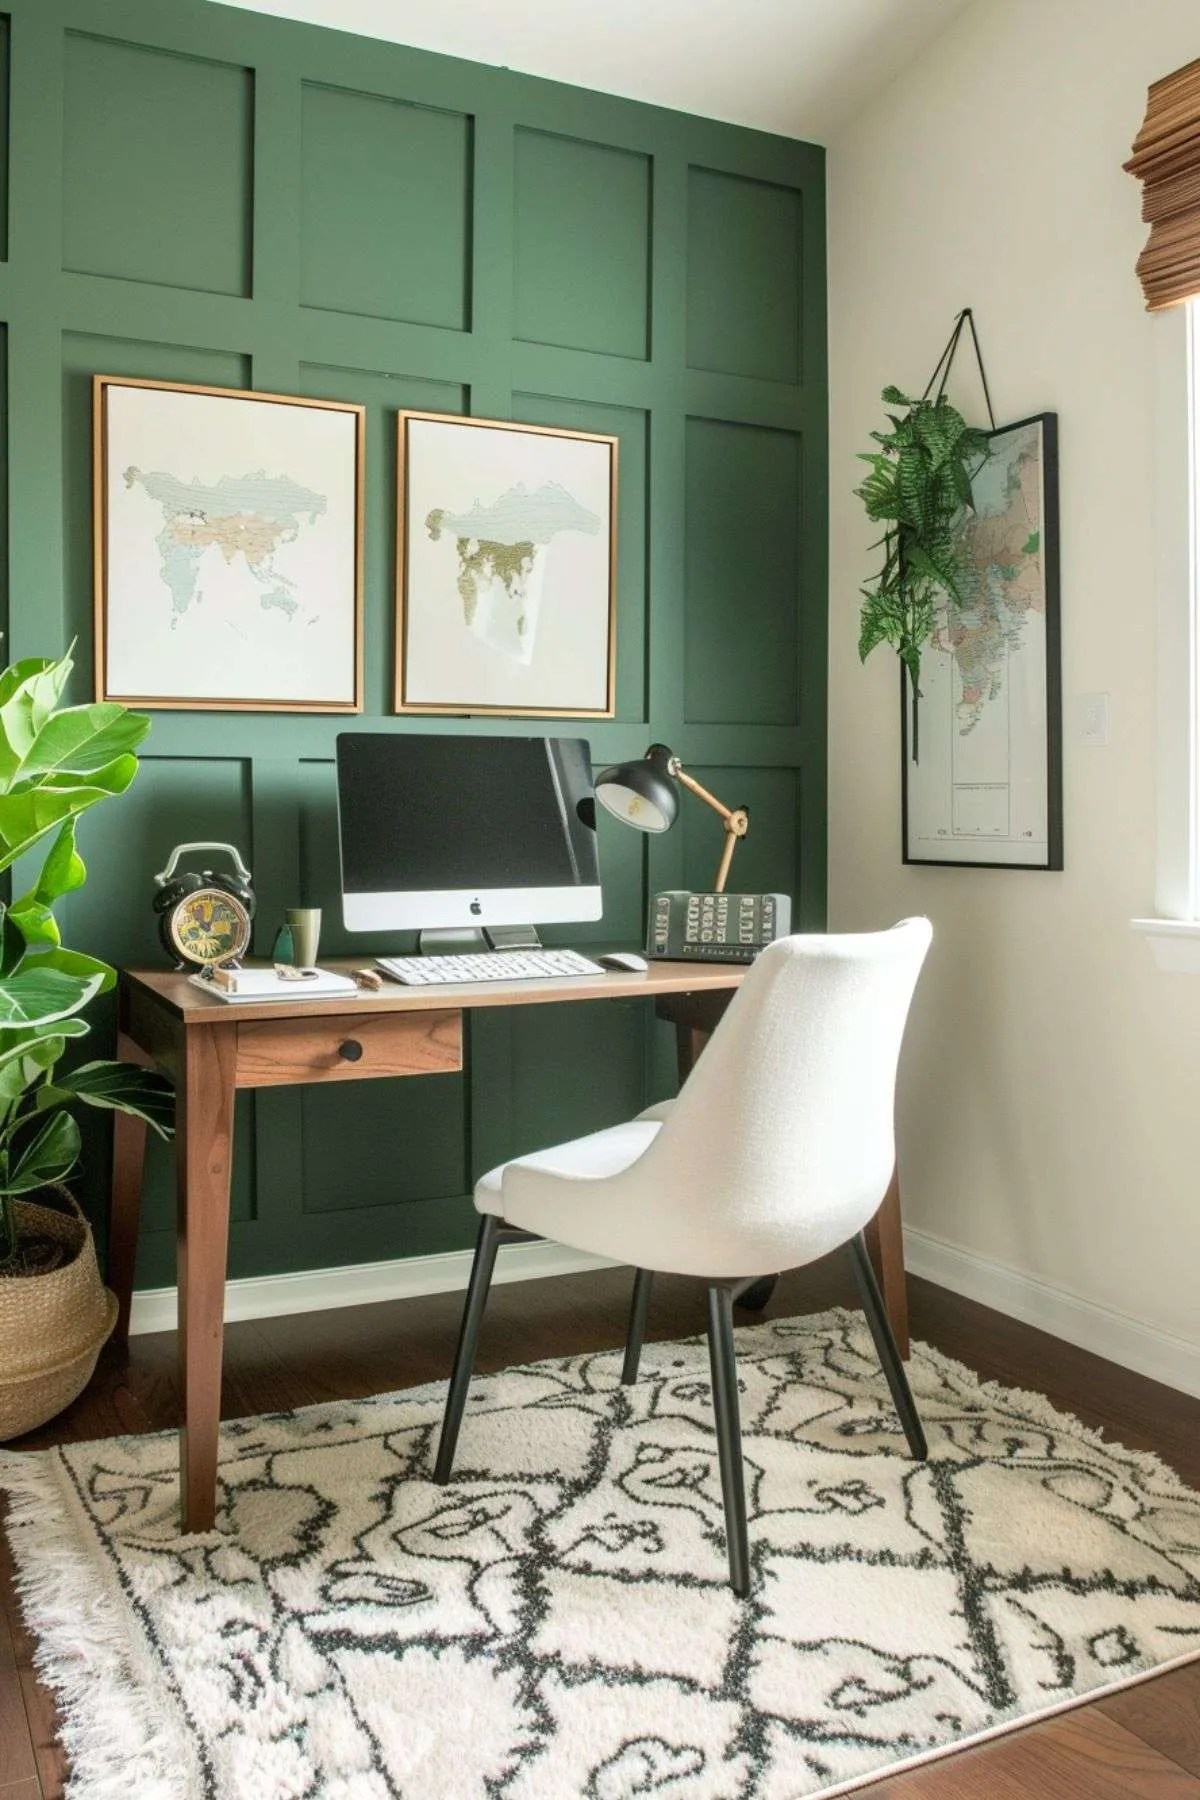 Small Home Office Setup – How to Create a Stylish and Functional Space